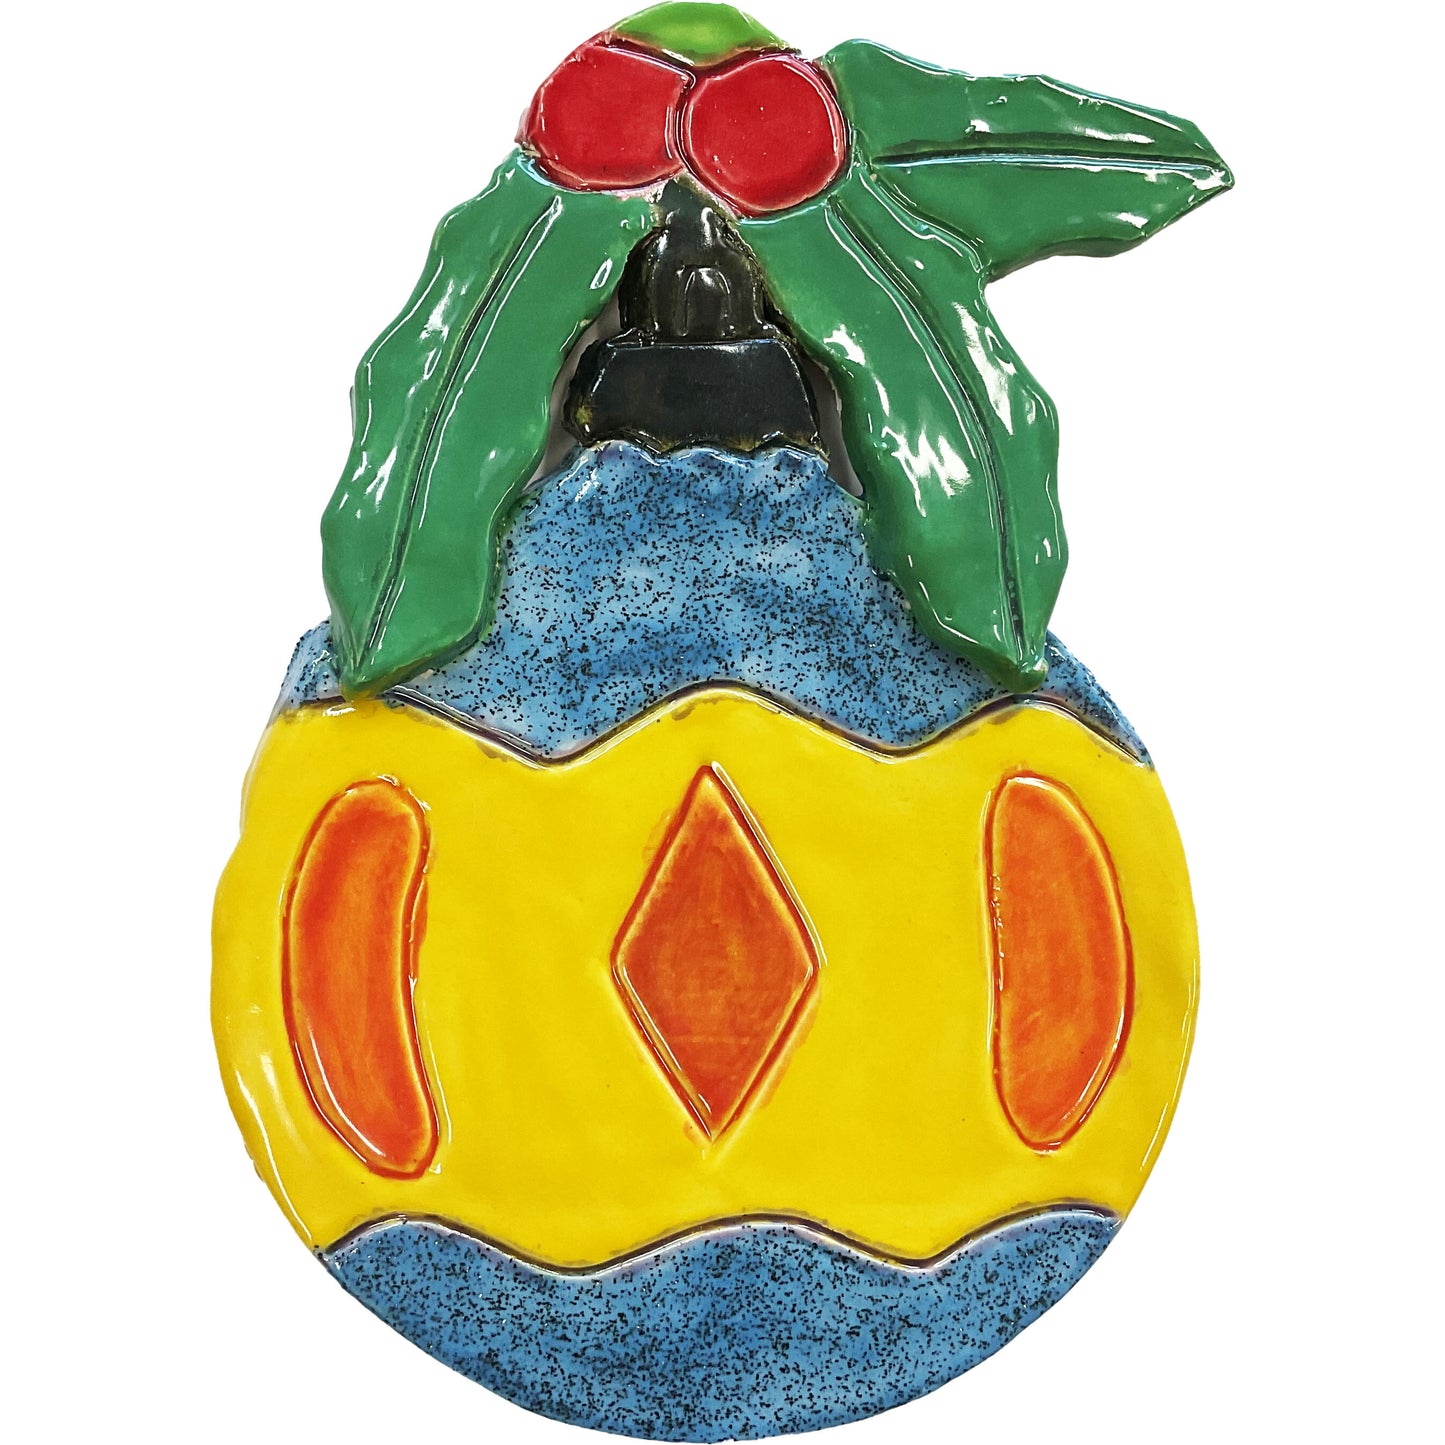 Ceramic Arts Handmade Clay Crafts 8-inch x 6-inch Glazed Christmas Ornament by Eric Stacy